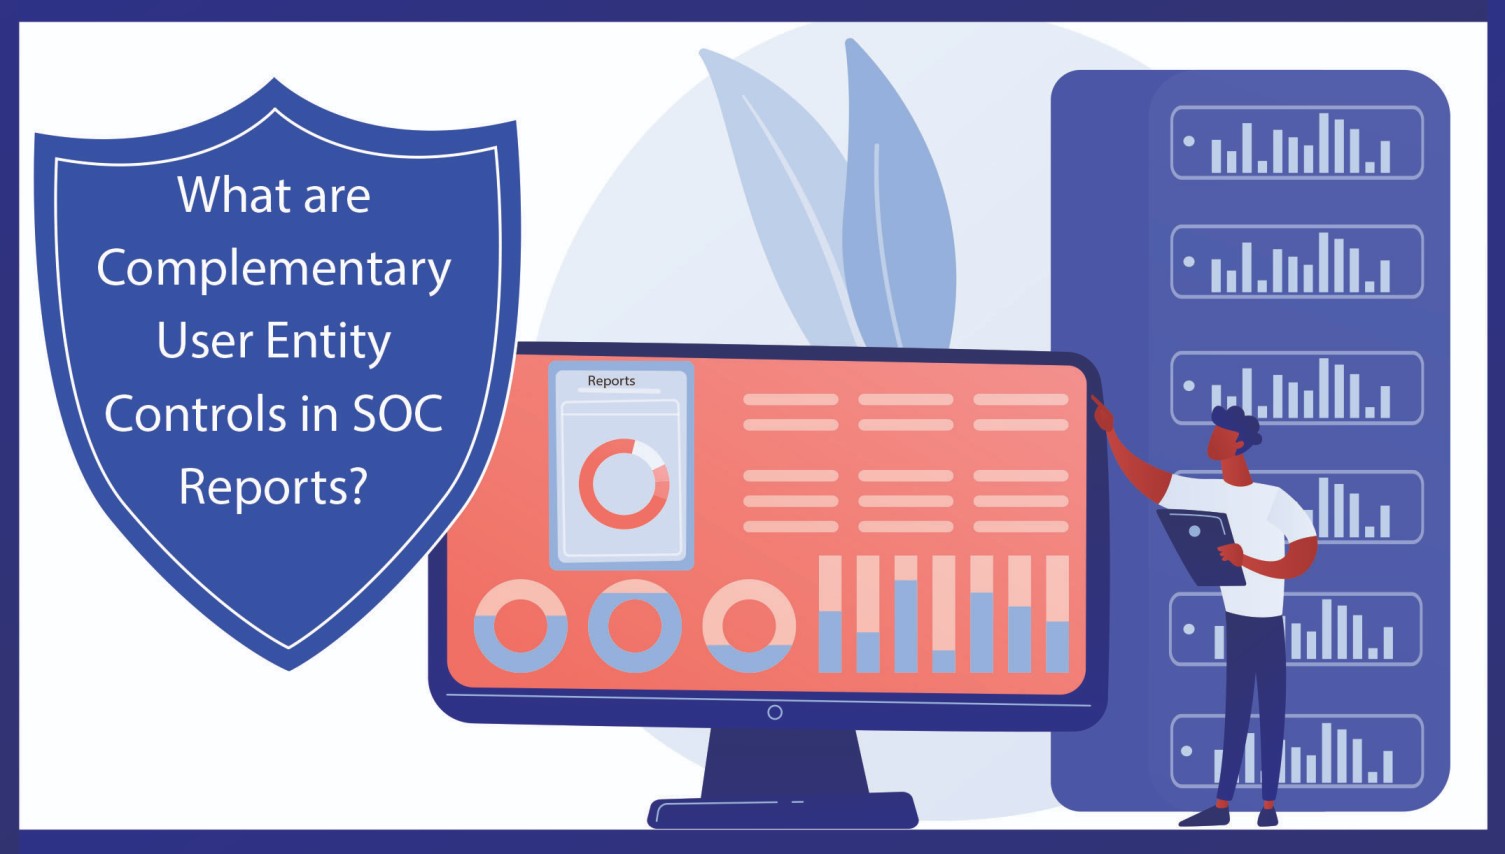 What are Complementary User Entity Controls in SOC Reports?